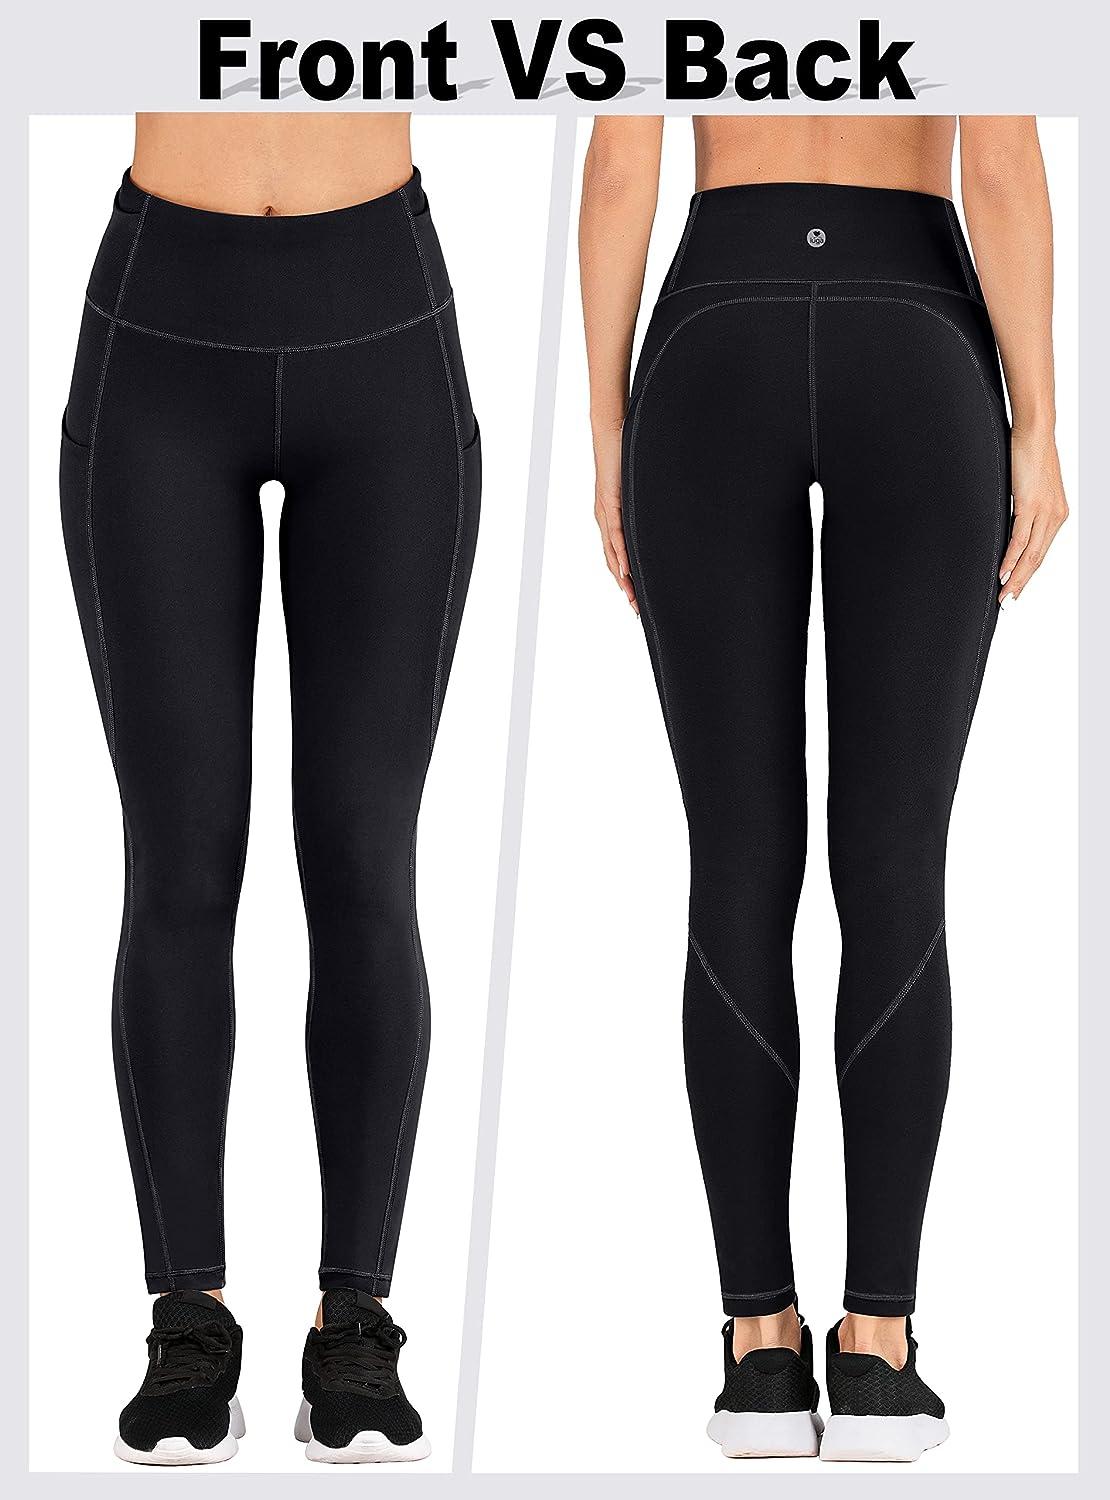 Yoga Pants vs Leggings: What are the differences between them? – IUGA